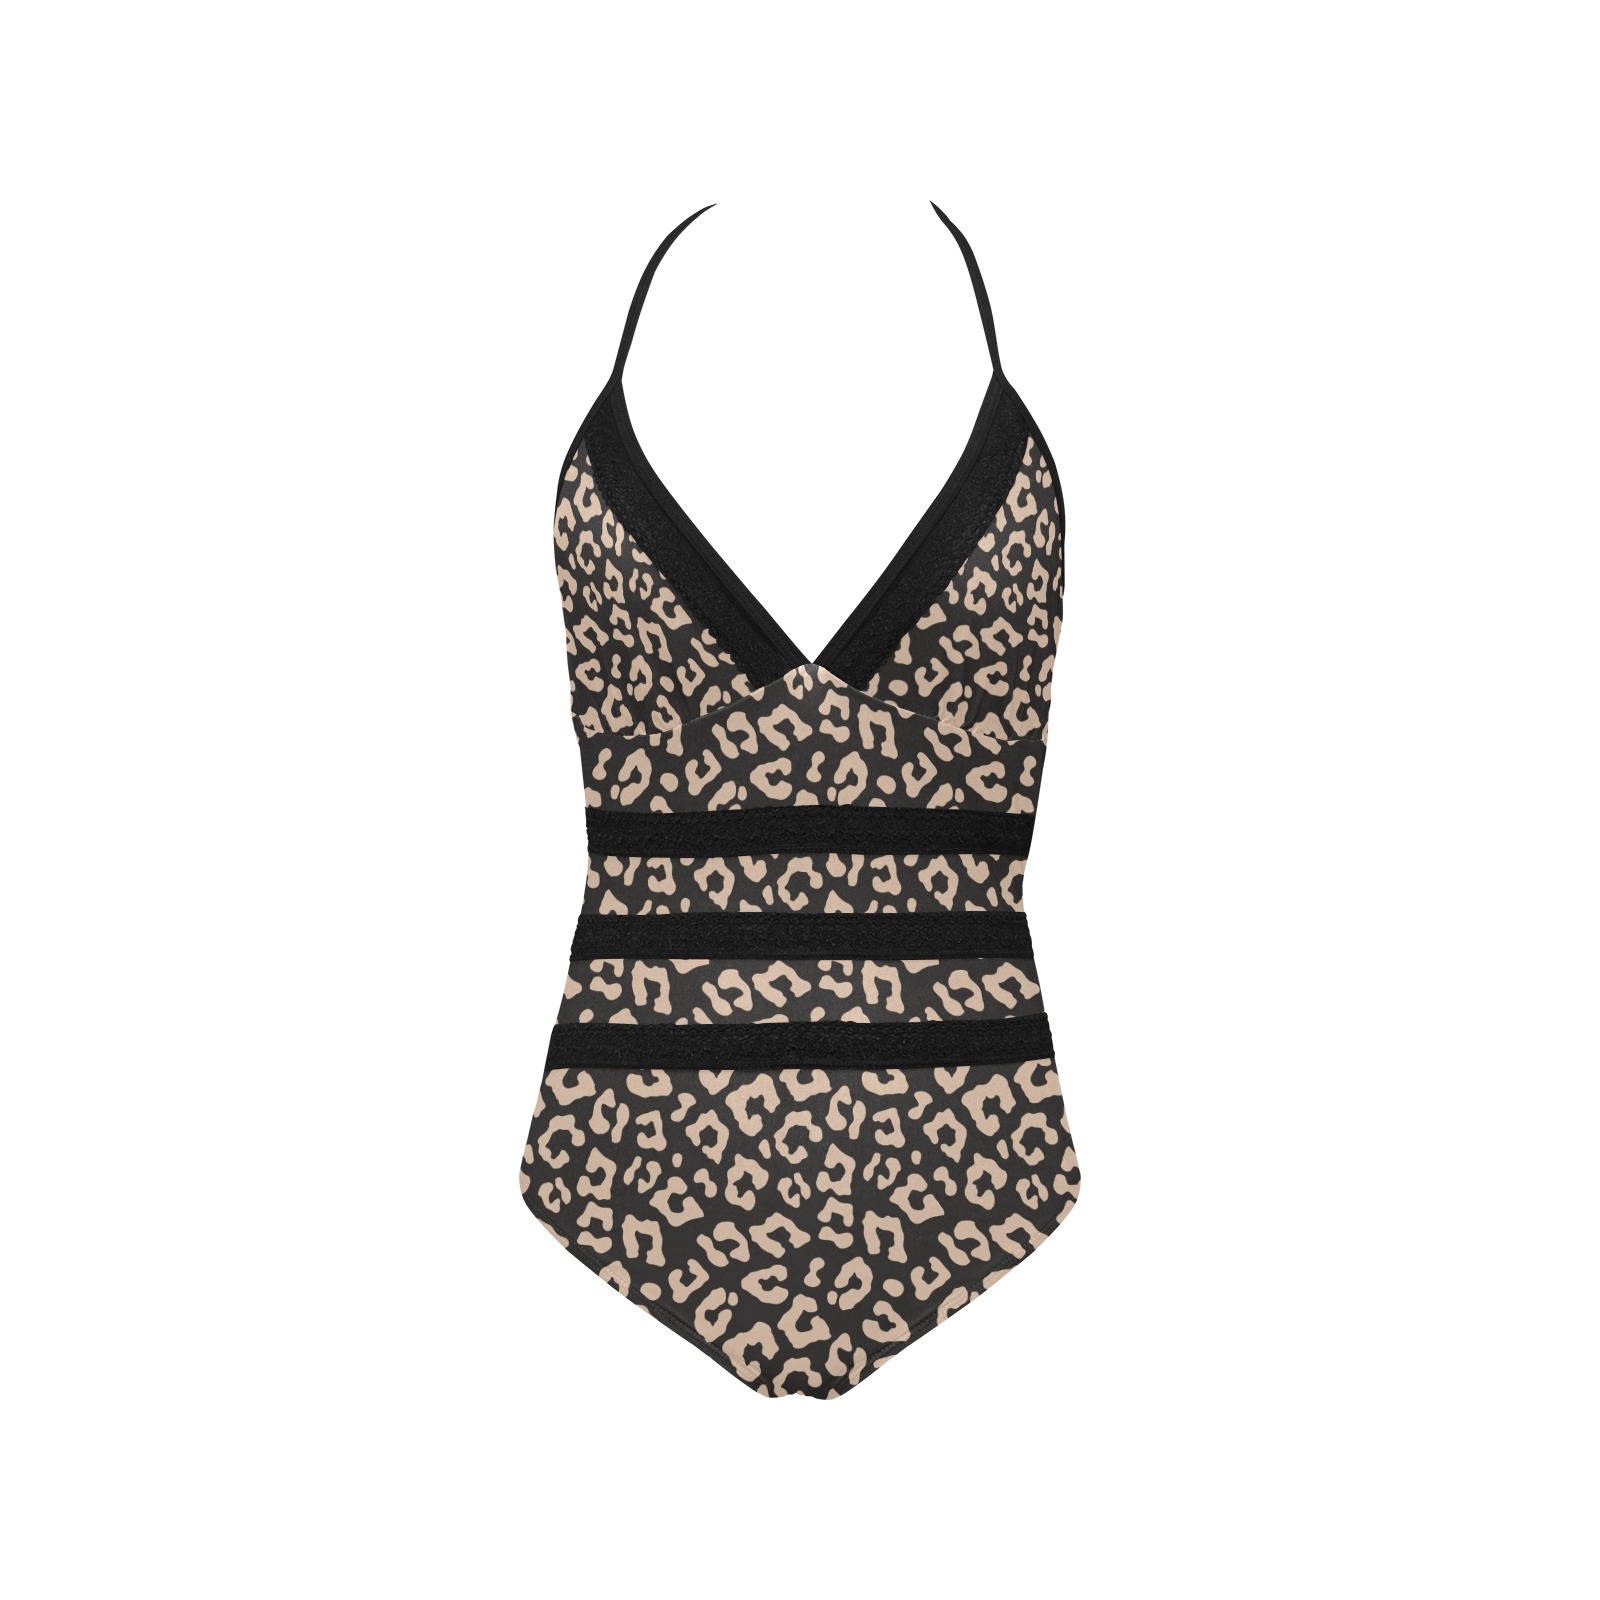 Leopard and Lace Halter Style One Piece Swim Suit Lace Band Embossing Swimsuit (Model S15)